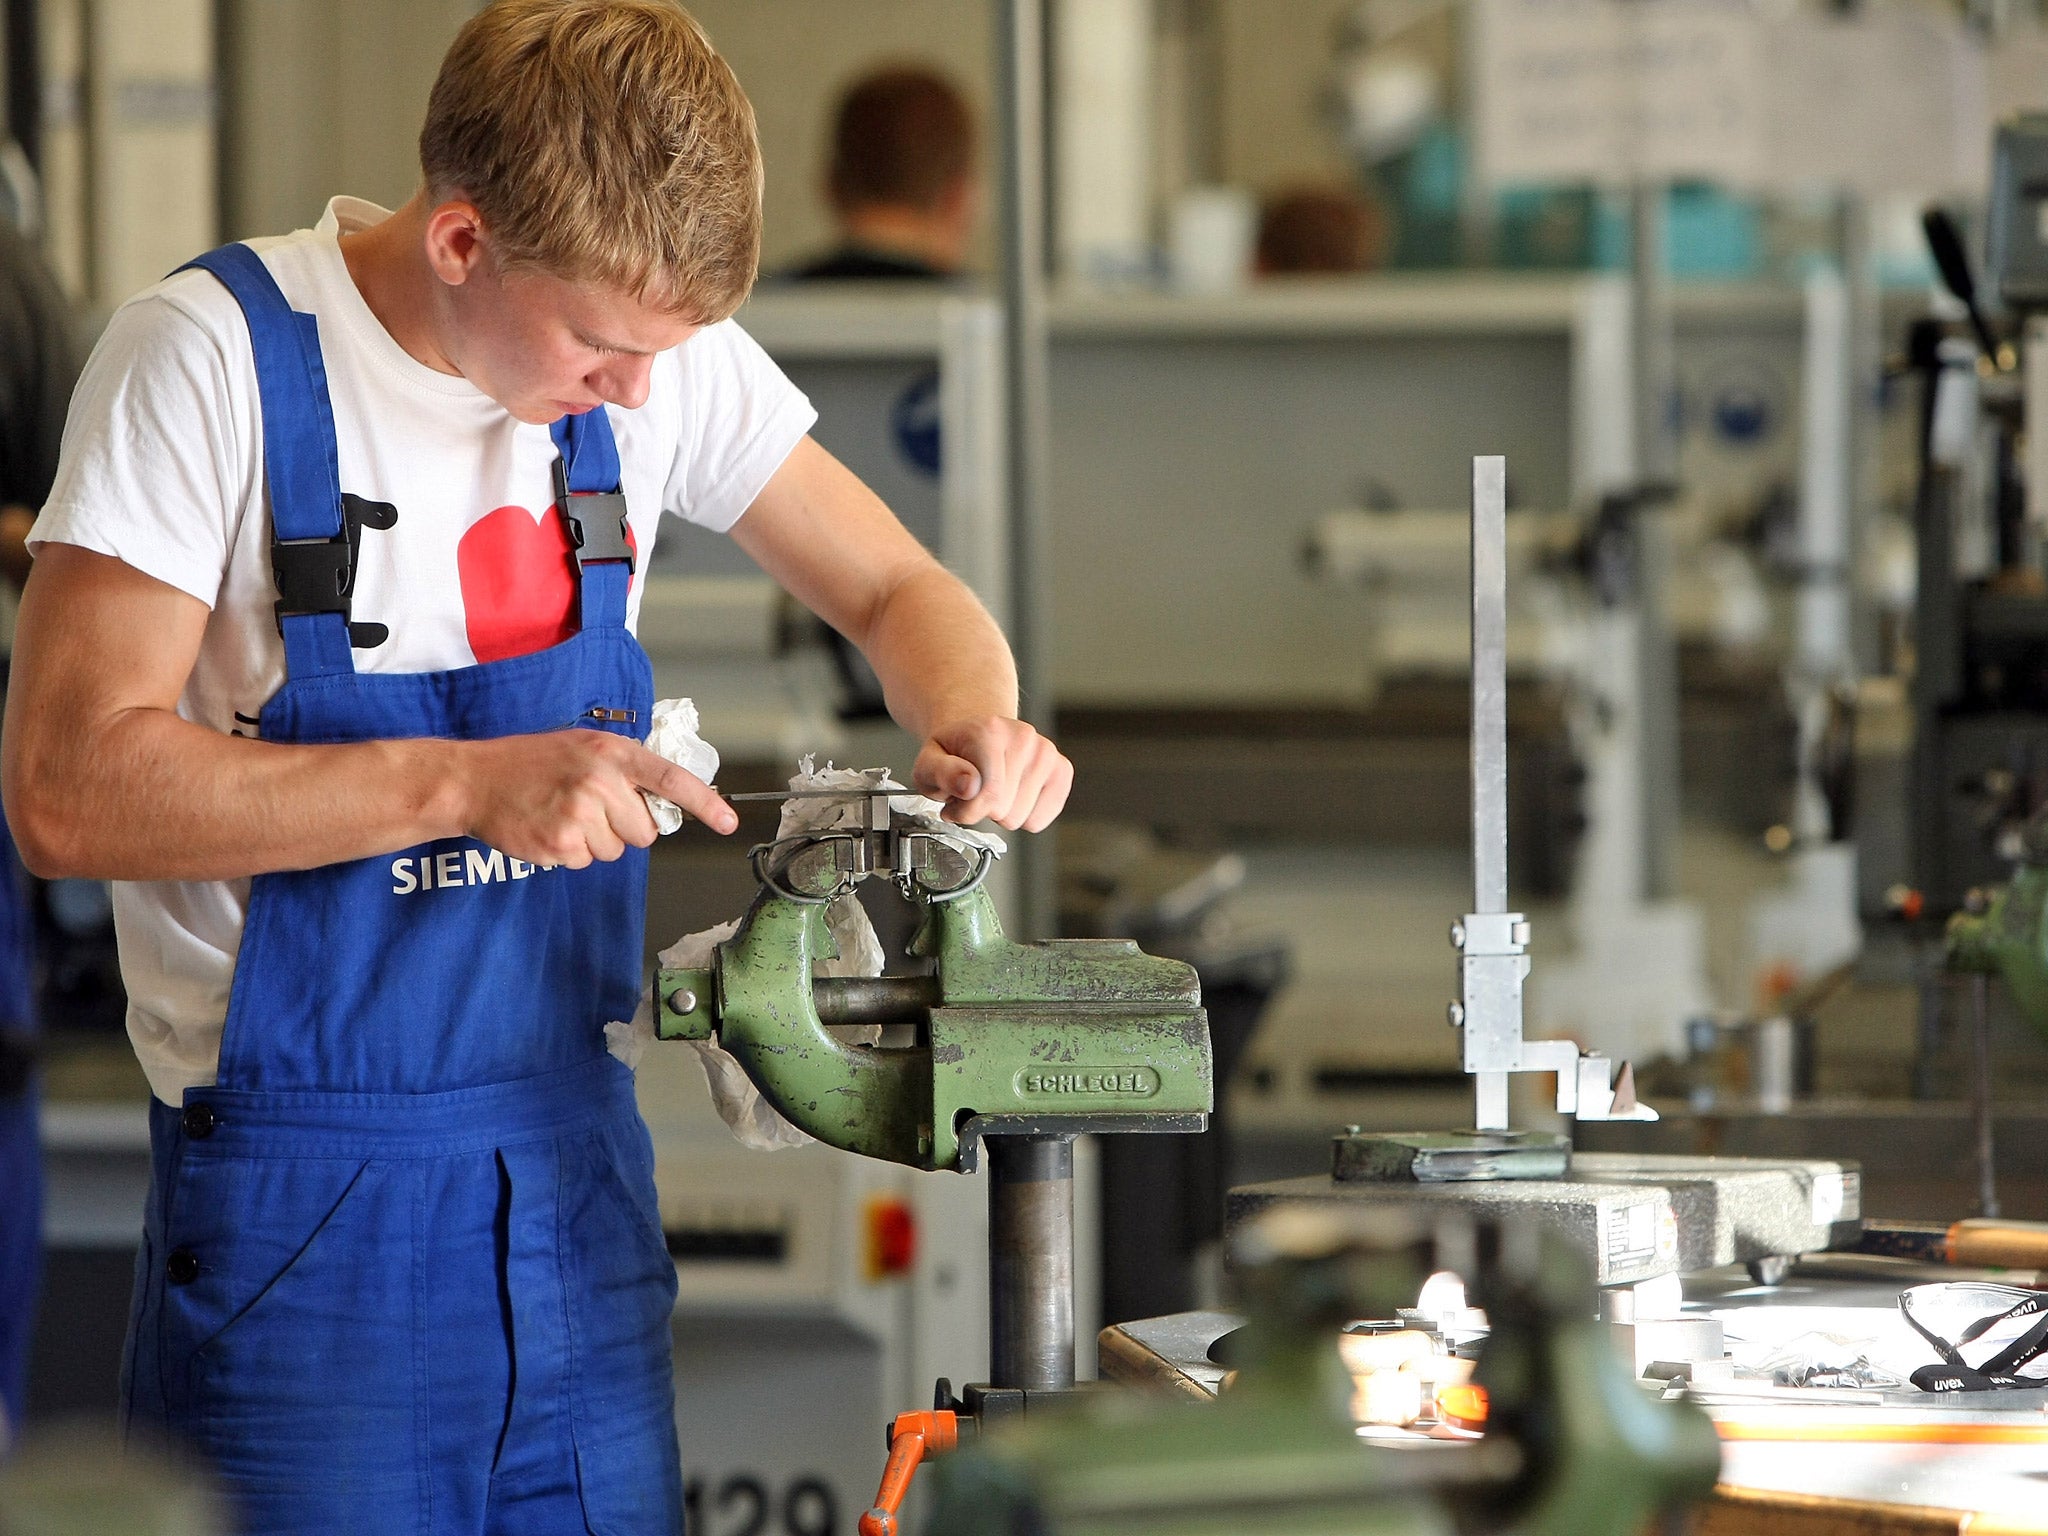 In 2014 there were 1.8 million applications for only 166,000 apprenticeships in England